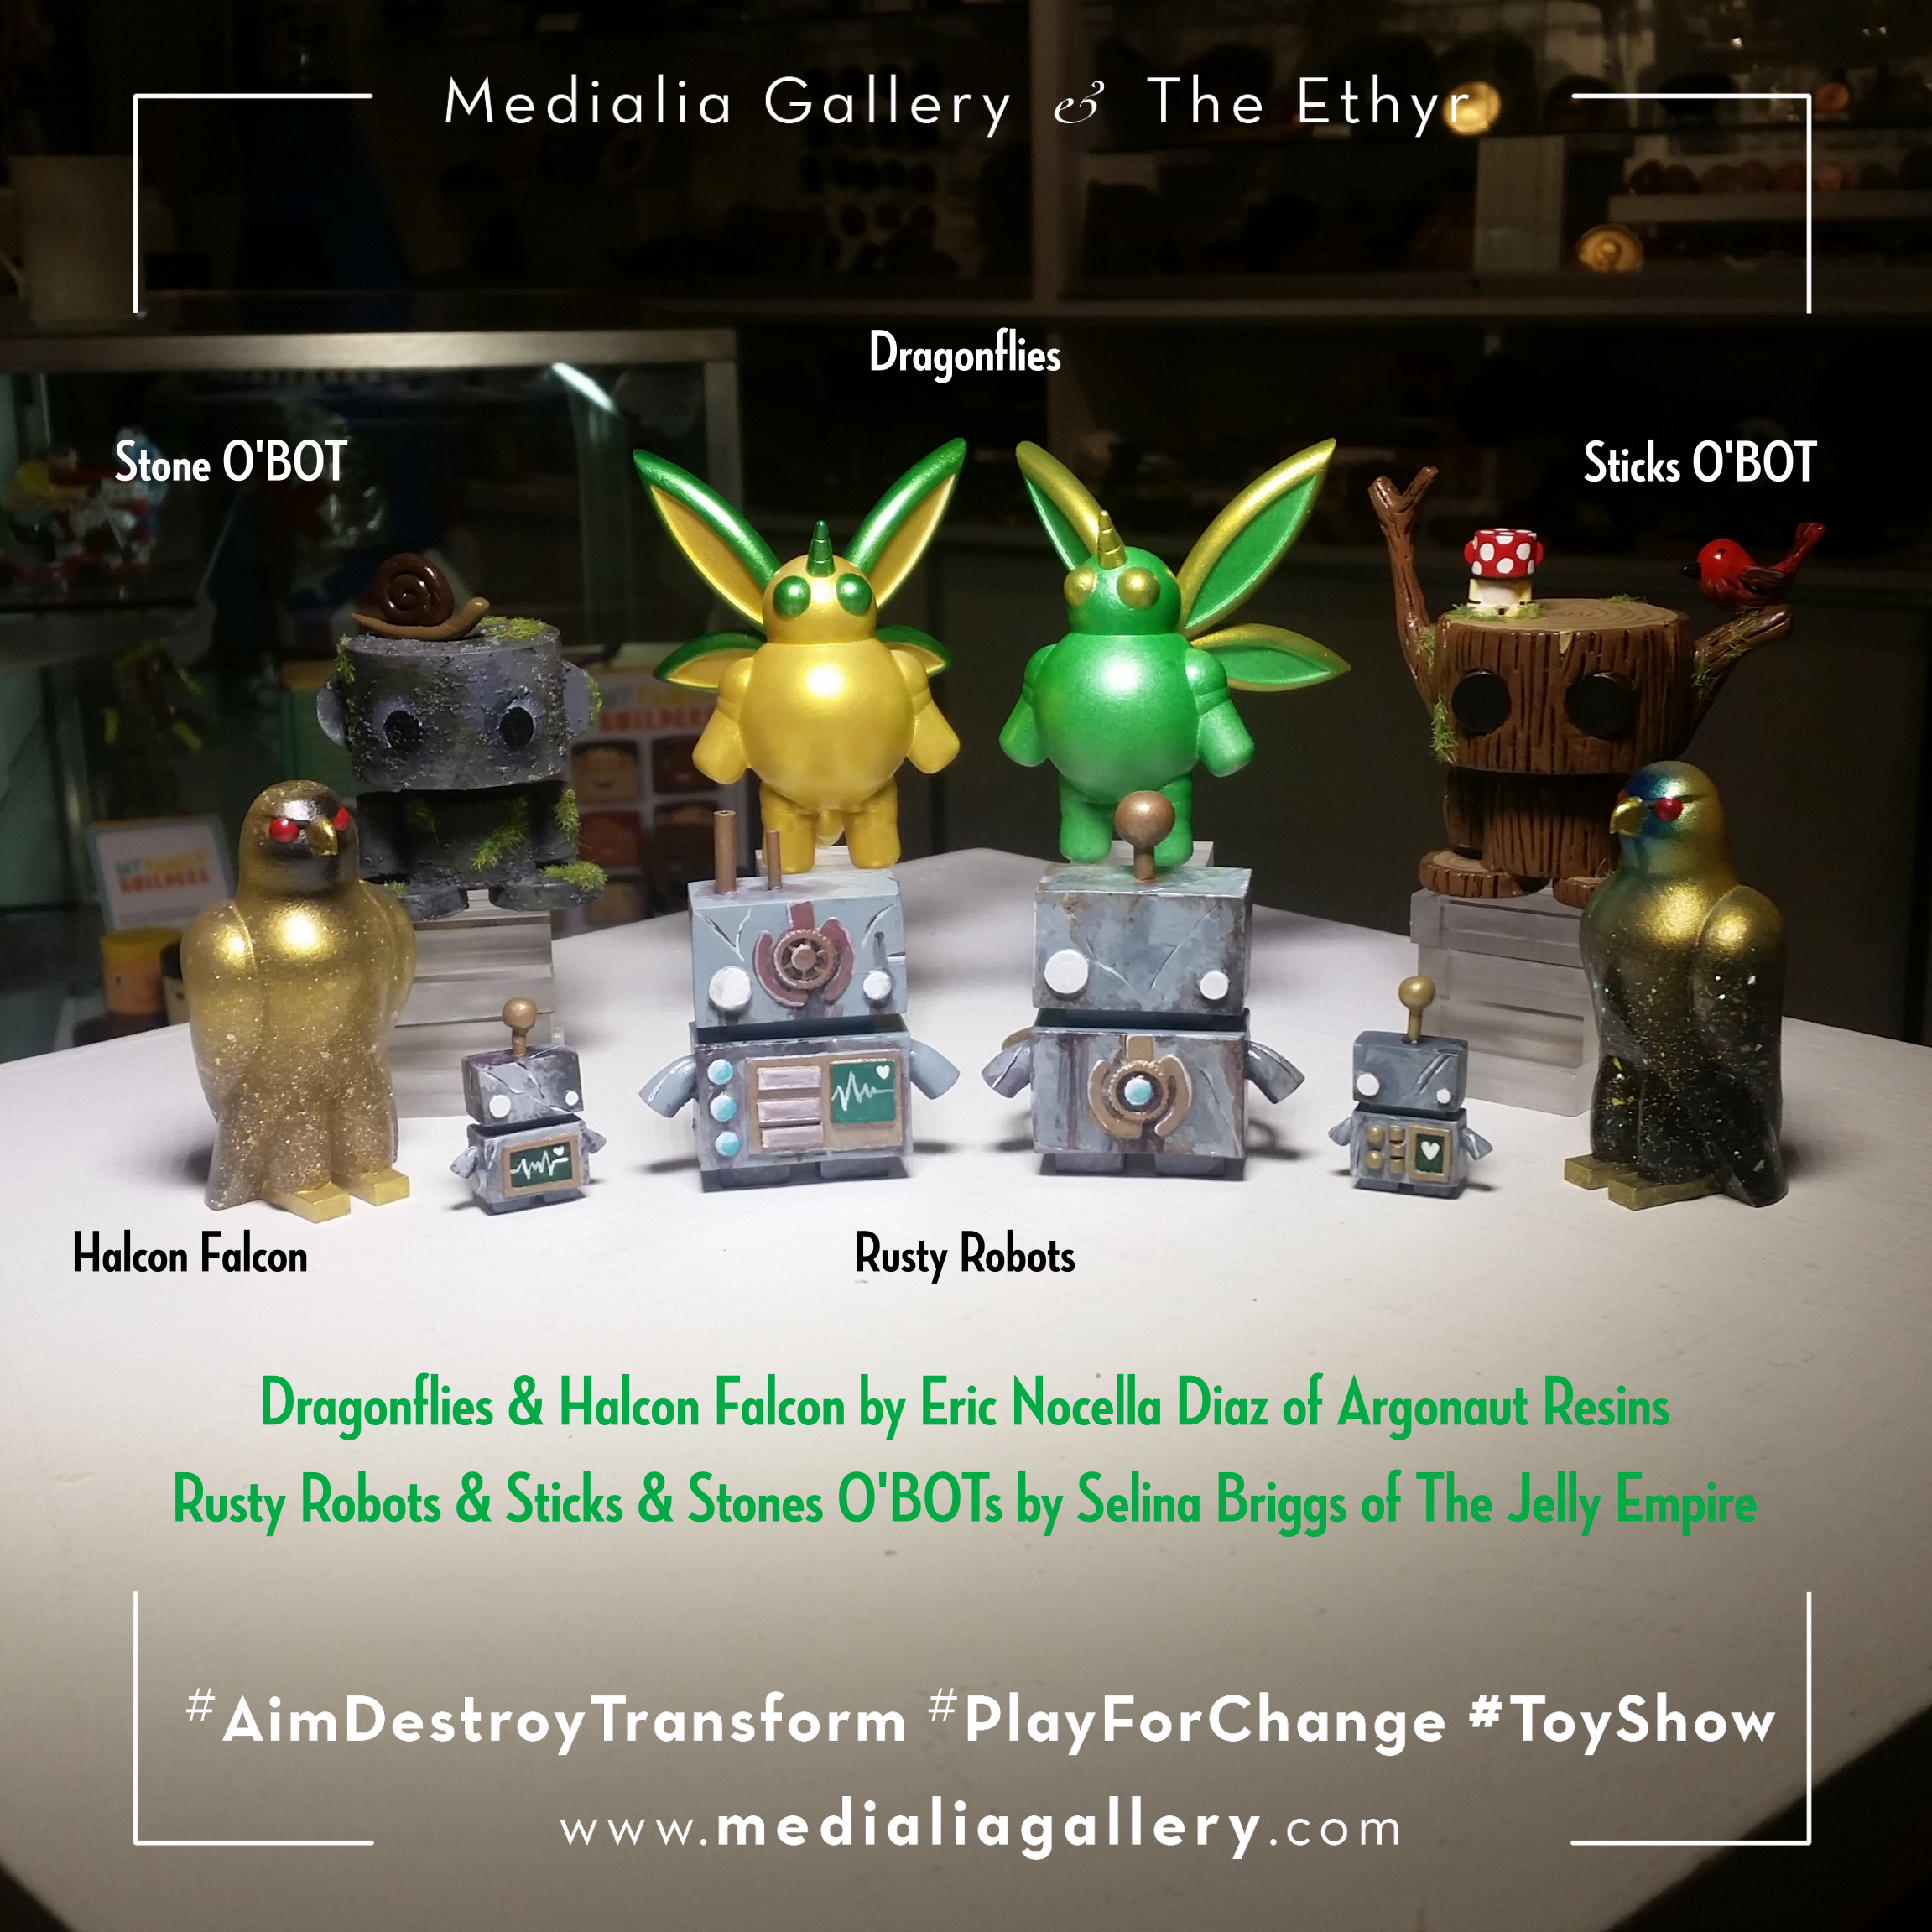 MedialiaGallery_The_Ethyr_AimDestroyTransform_Toy_Show_announcement_The_Jelly_Empire_Robots_Selina_Briggs_VIII_November_2017.jpg.png